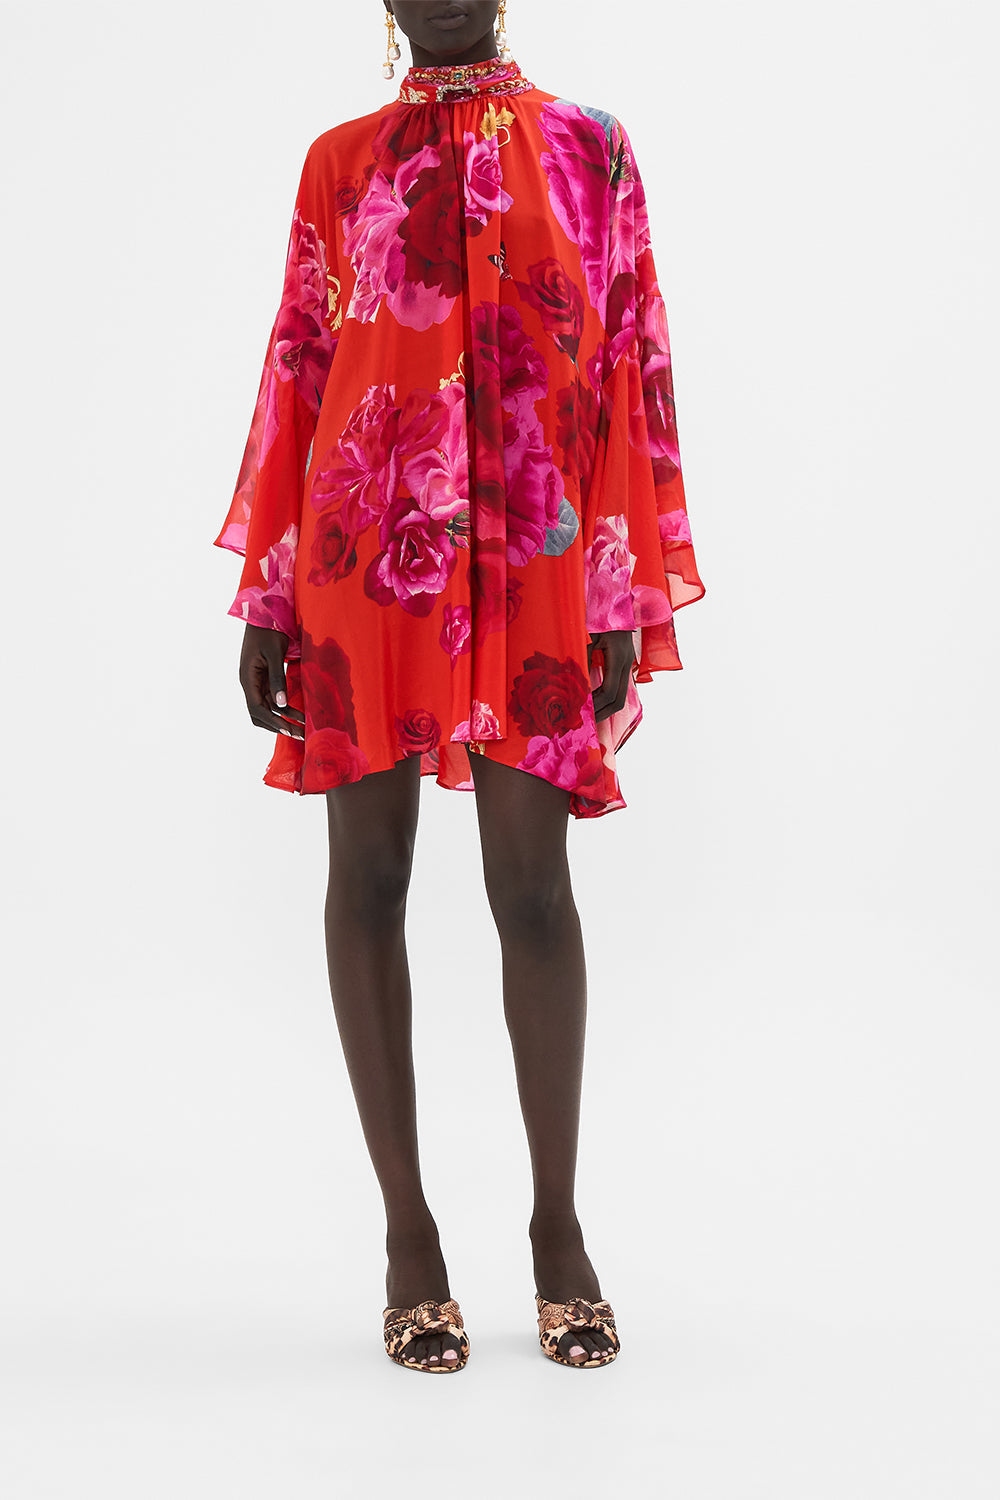 Front view of model wearing CAMILLA high neck silk dress in An Italian Rosa print